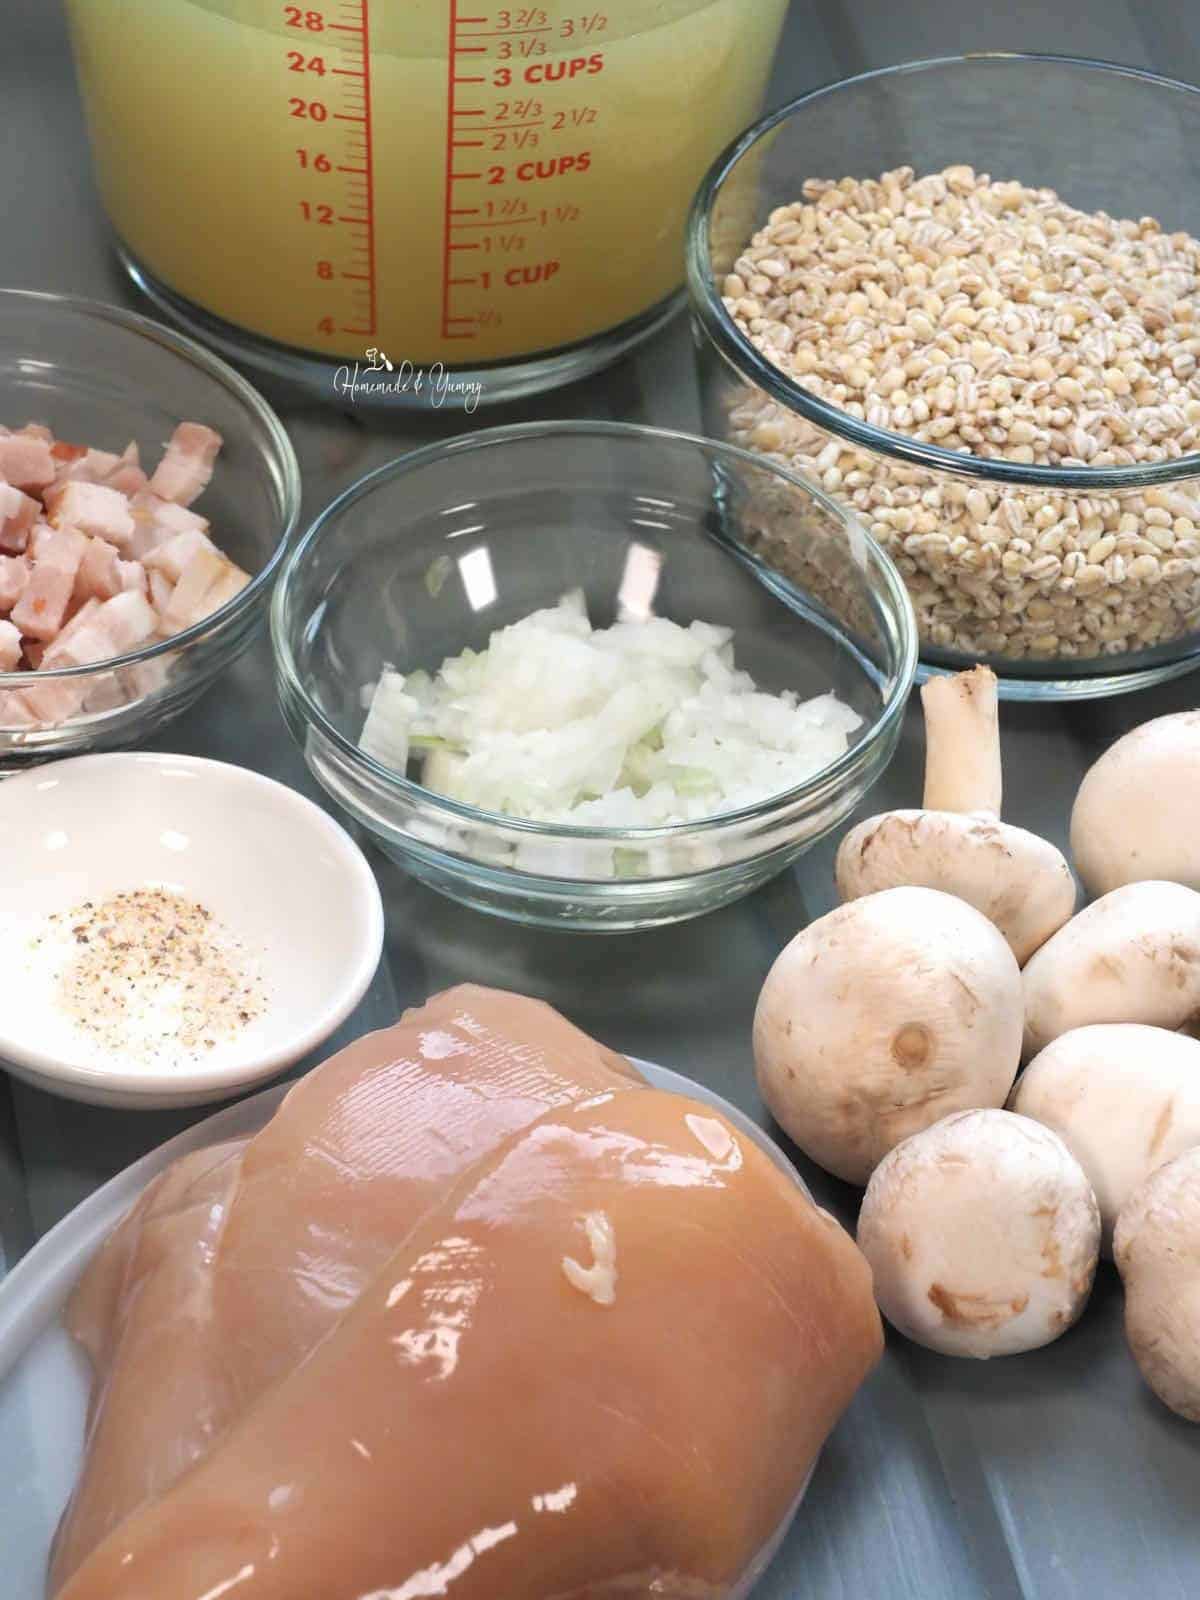 Ingredients to make the chicken and mushroom casserole with barley.